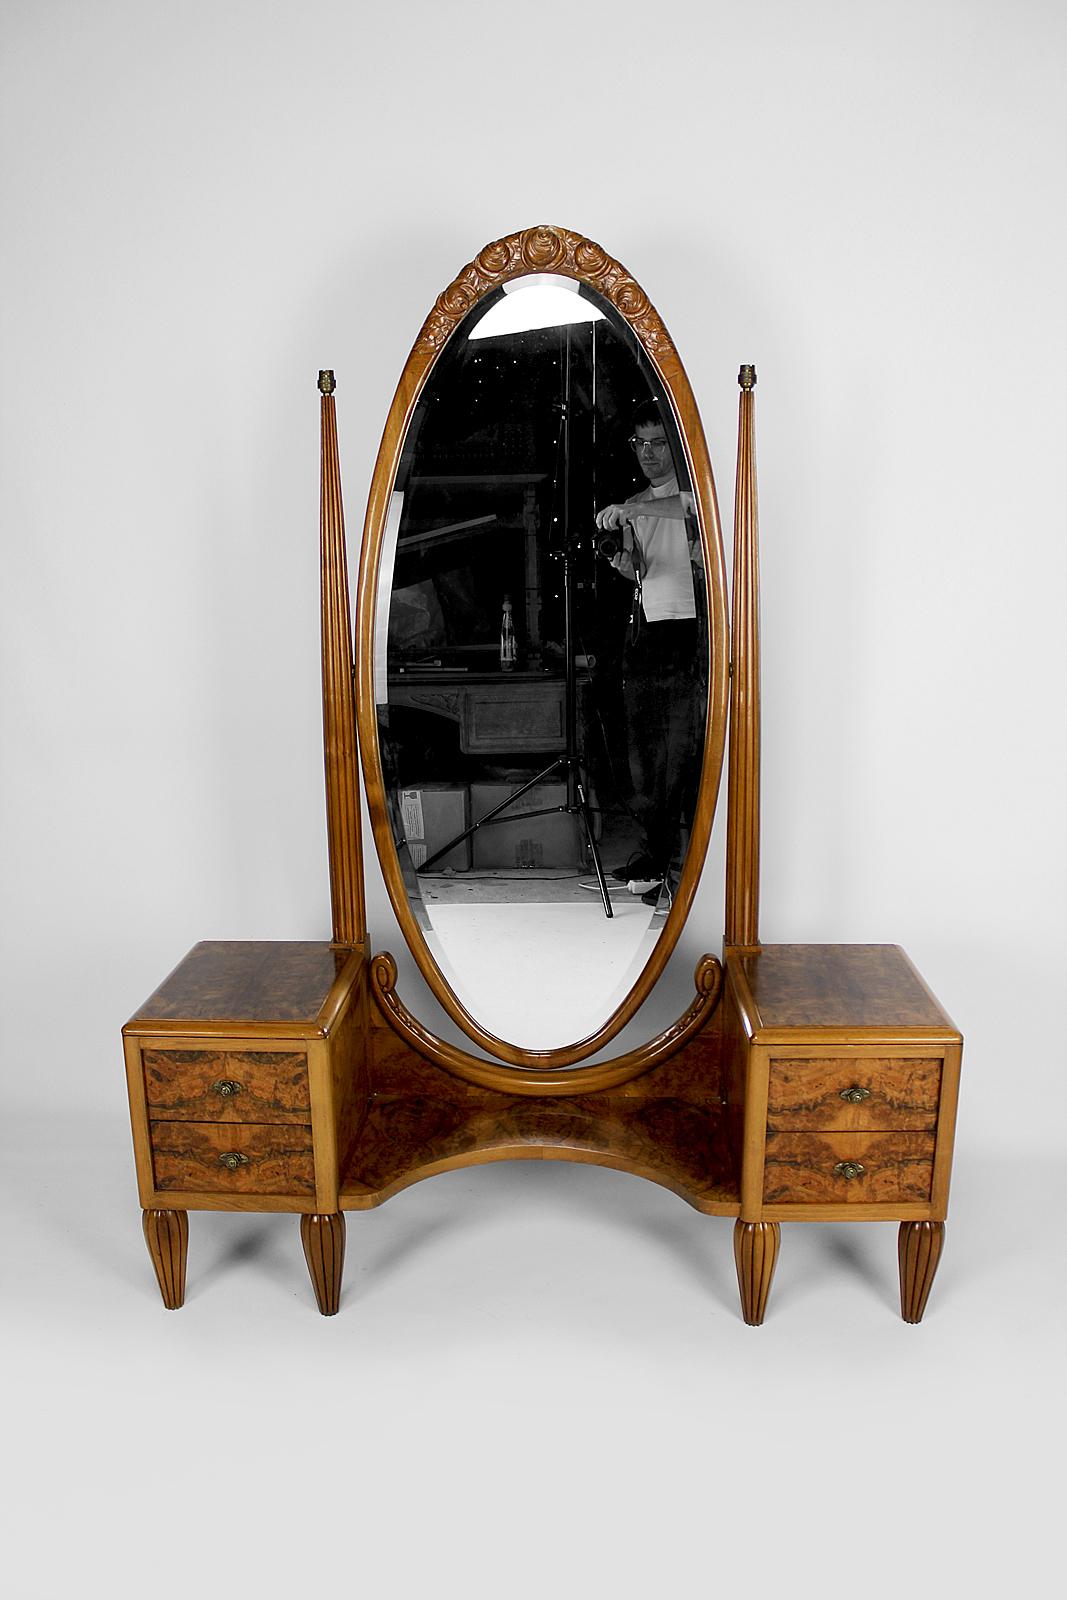 French Art Deco Psyche Dressing Table and Pouf by Ateliers Gauthier-Poinsignon, c. 1920 For Sale